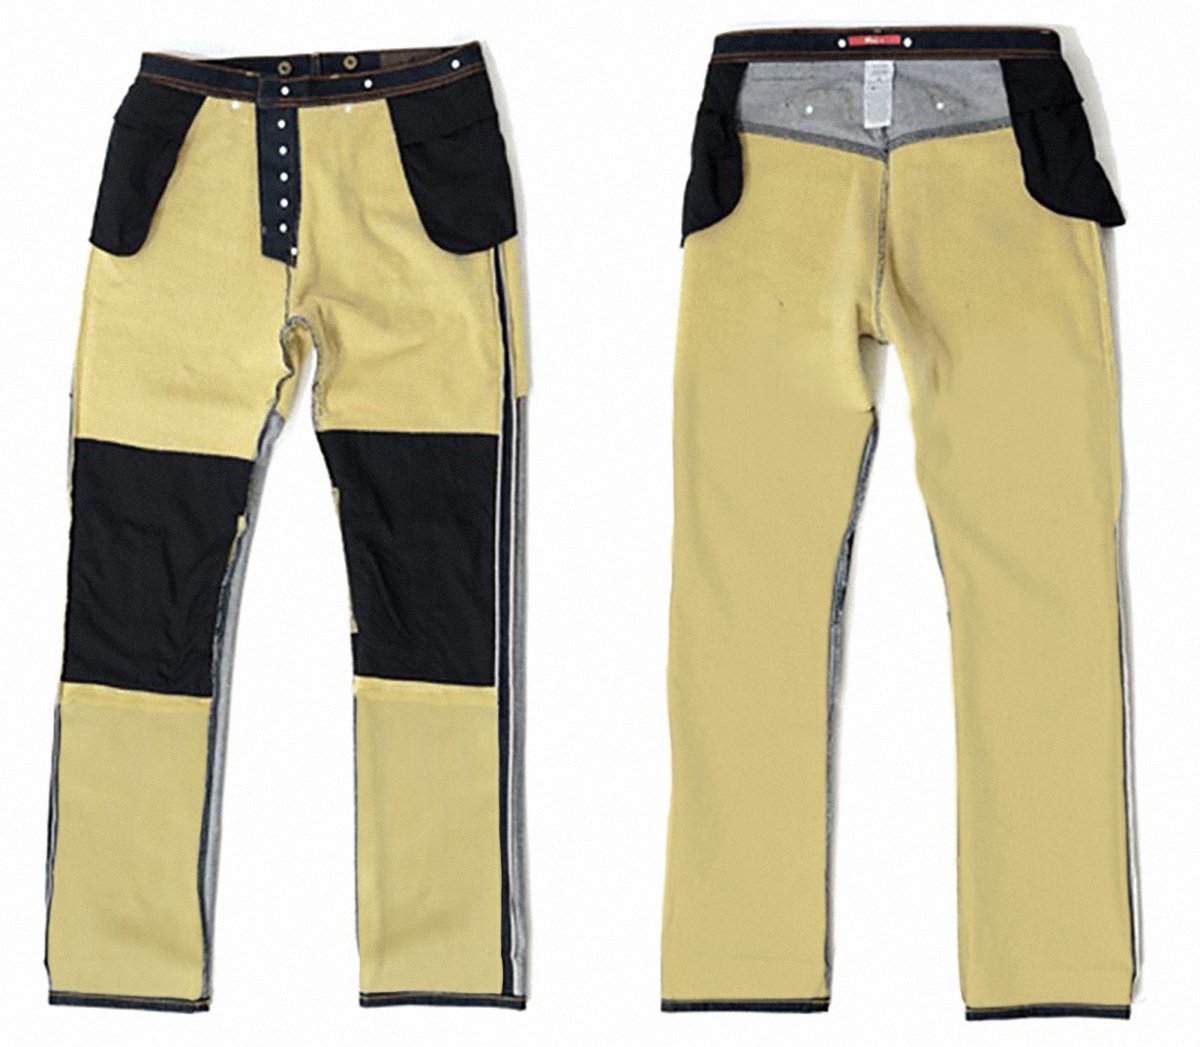 Full lined Kevlar motorcycle jeans